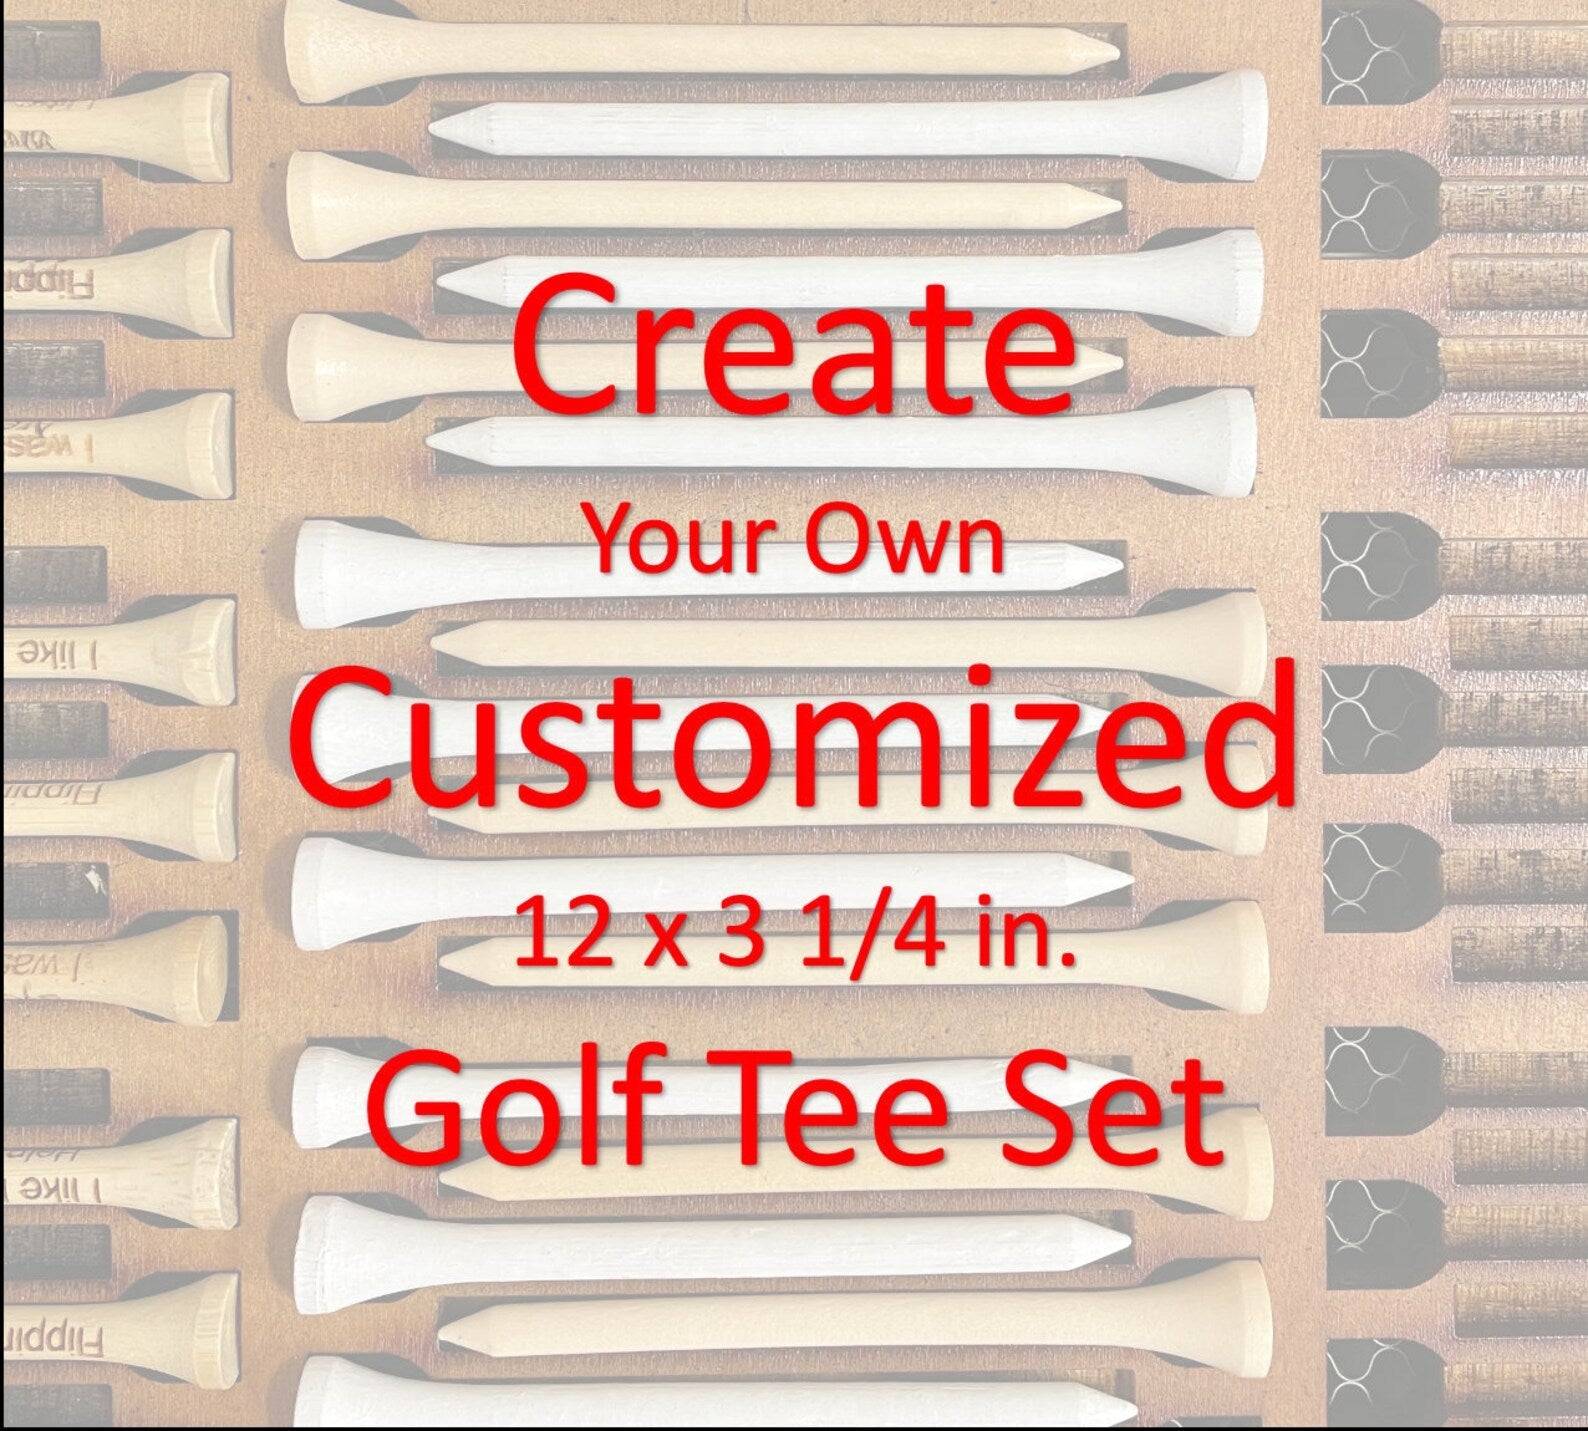 12 - 3 1/4 in. Customize Golf Tee Set, Alternative 2 Business Cards, Golfing Event, Marketing, Trade show, Groomsman gift, Pouch included